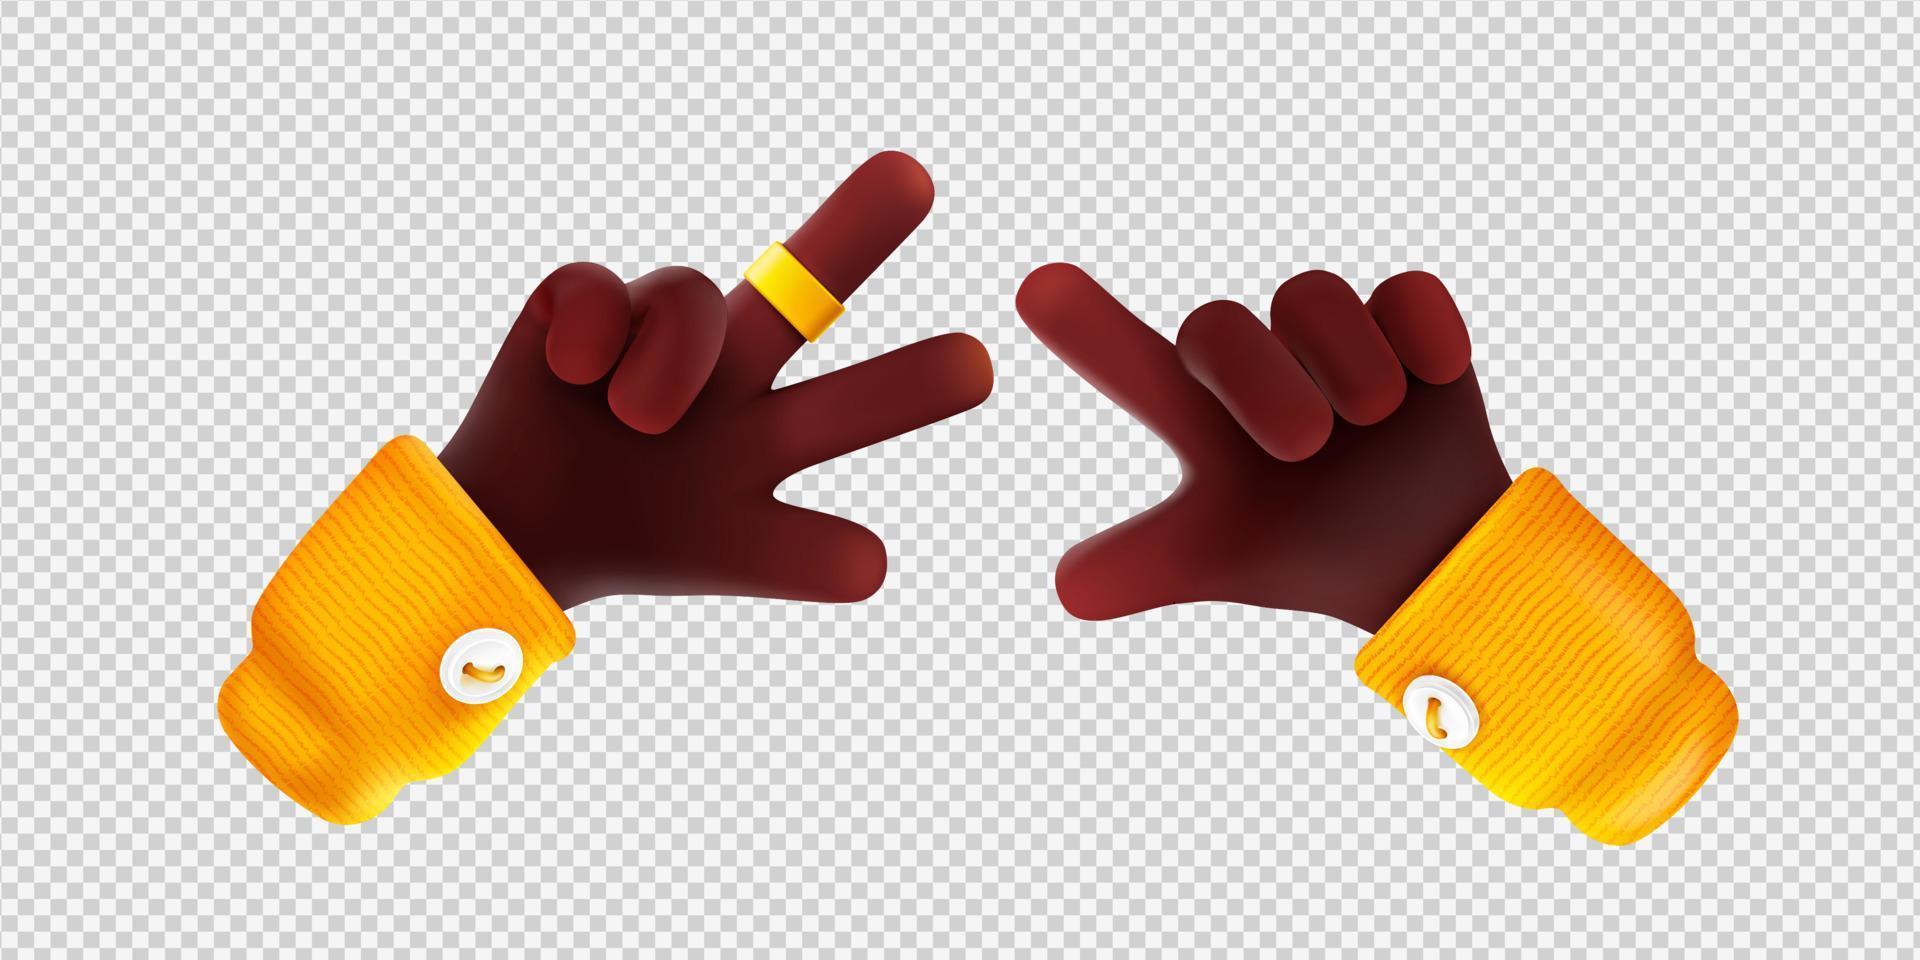 Hand gestures of victory and pointing vector